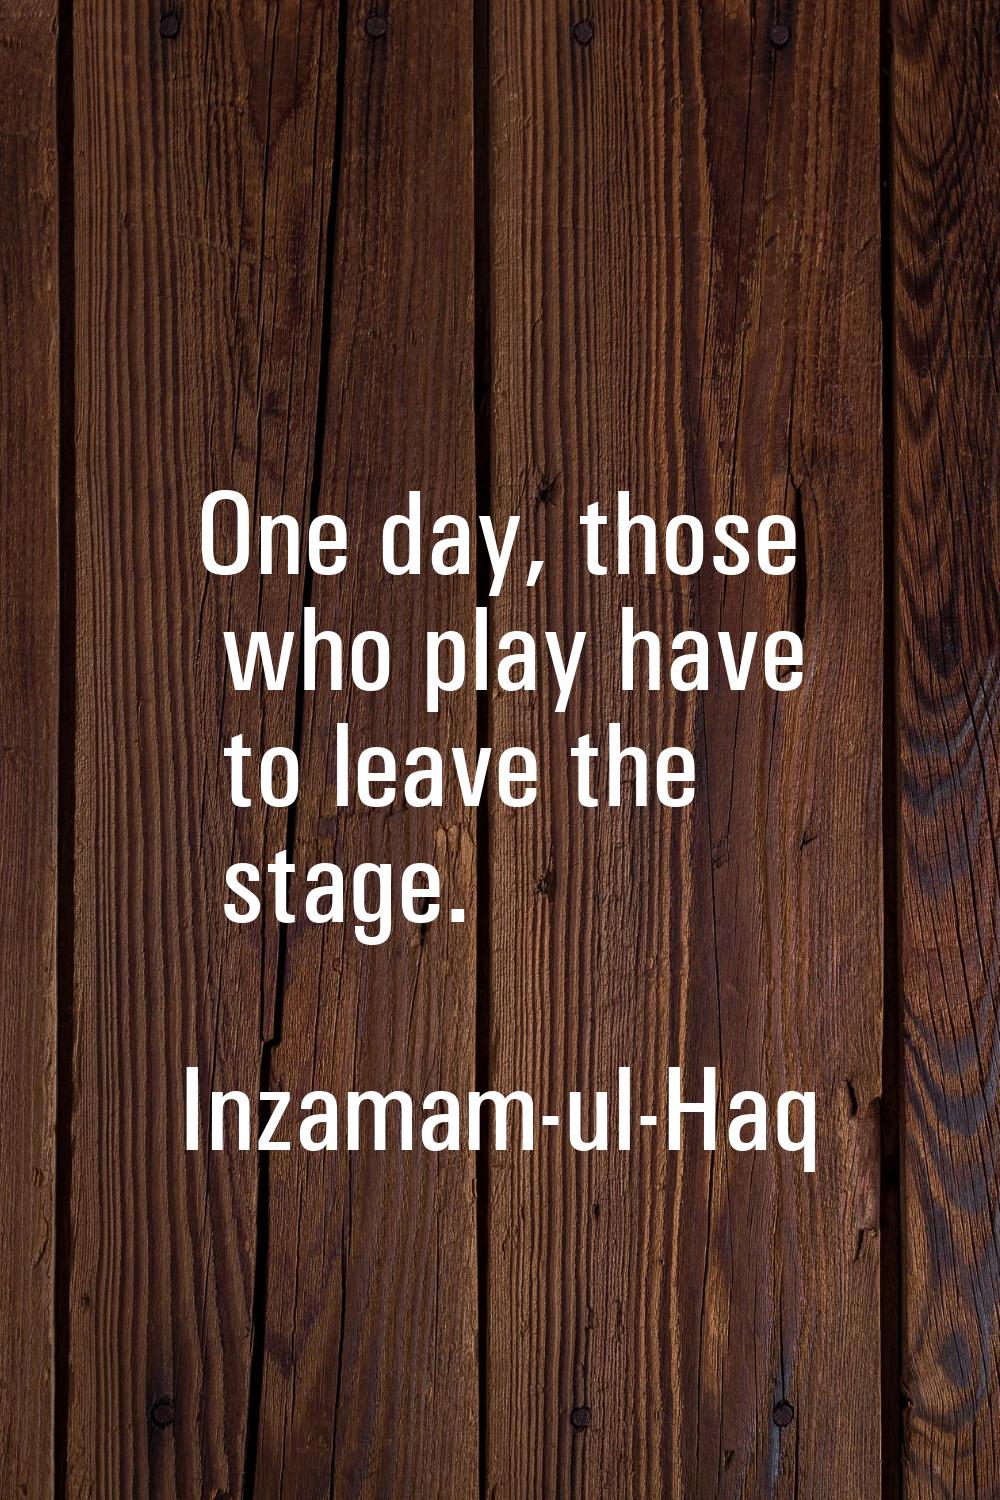 One day, those who play have to leave the stage.